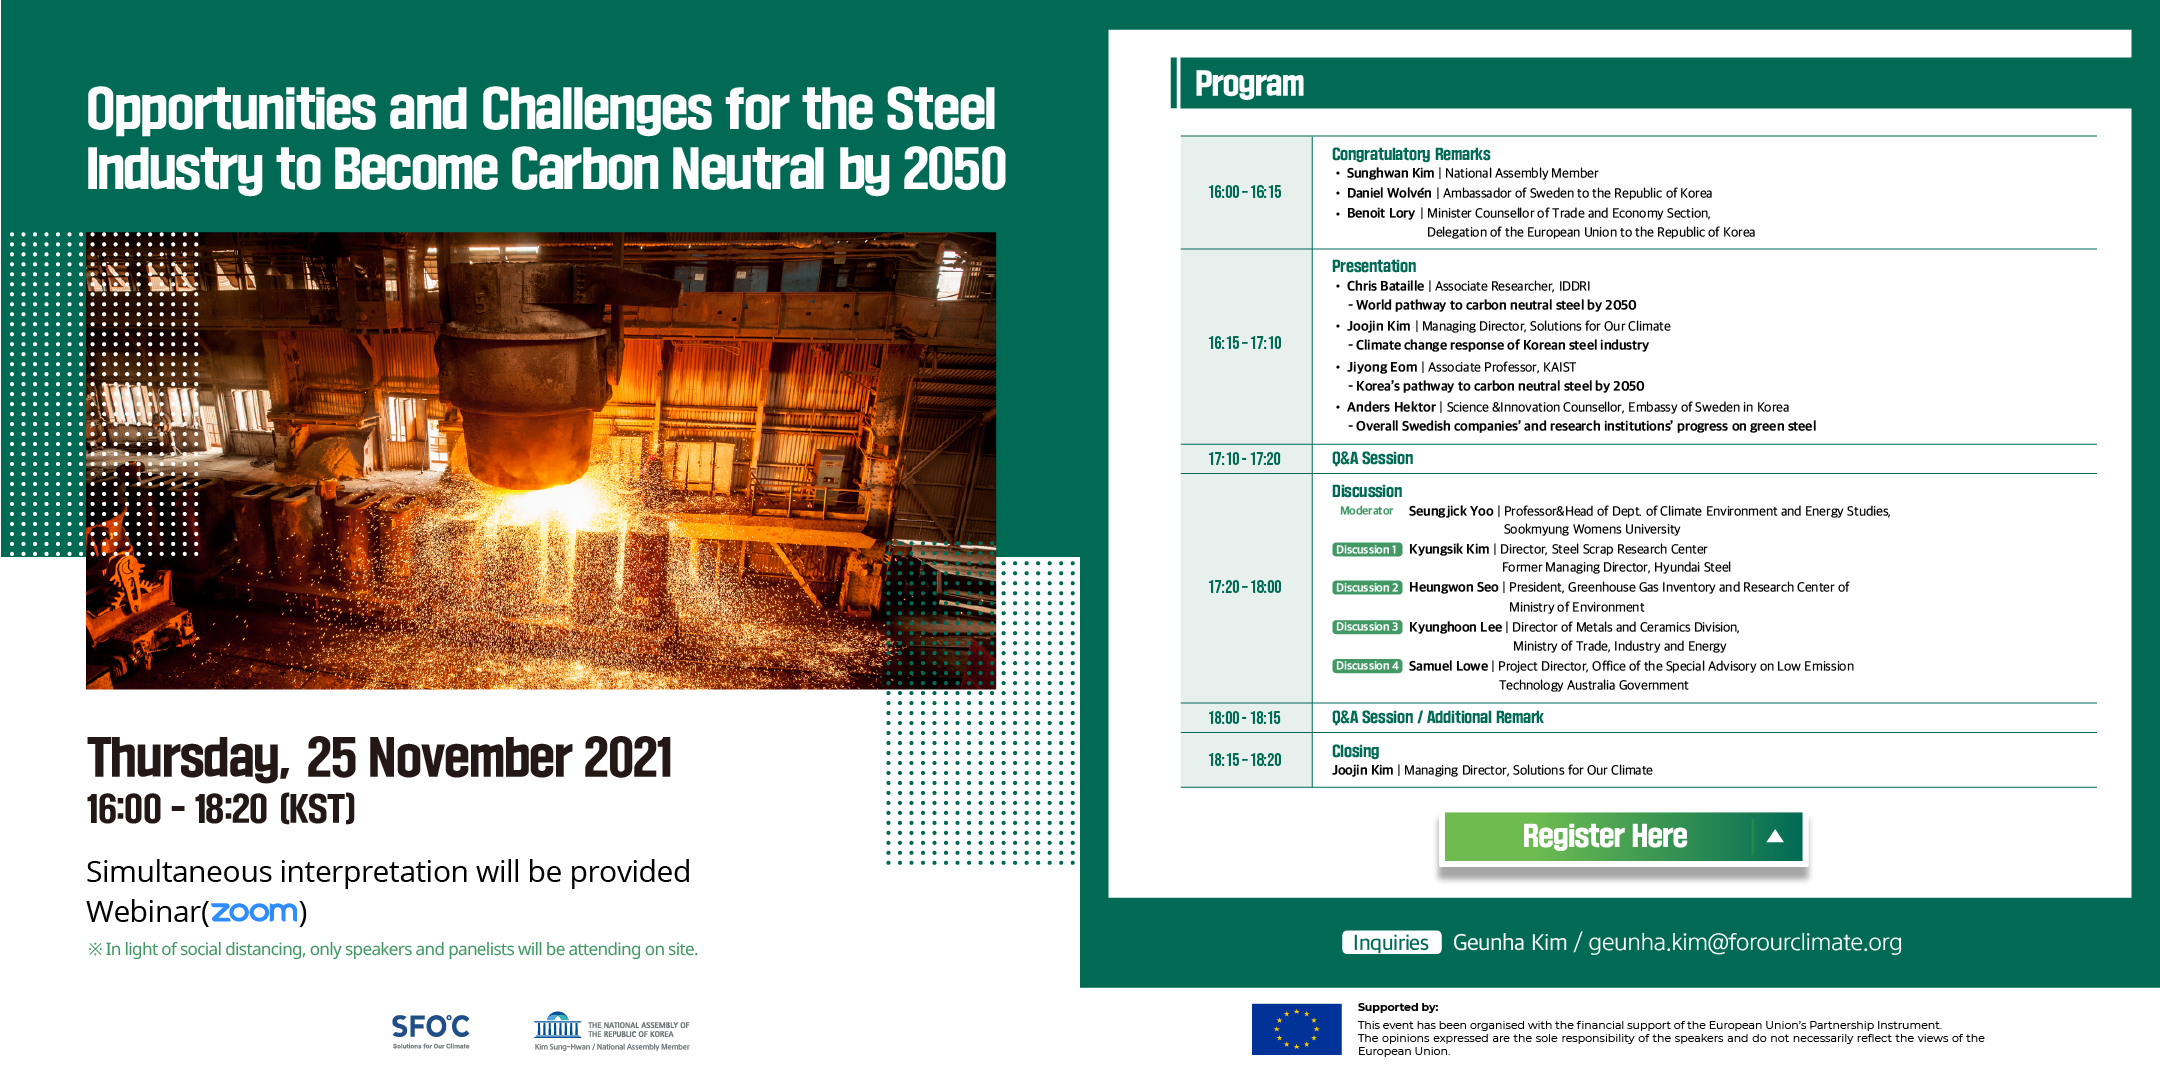 Opportunities and Challenges for the Steel Industry to Become Carbon Neutral by 2050